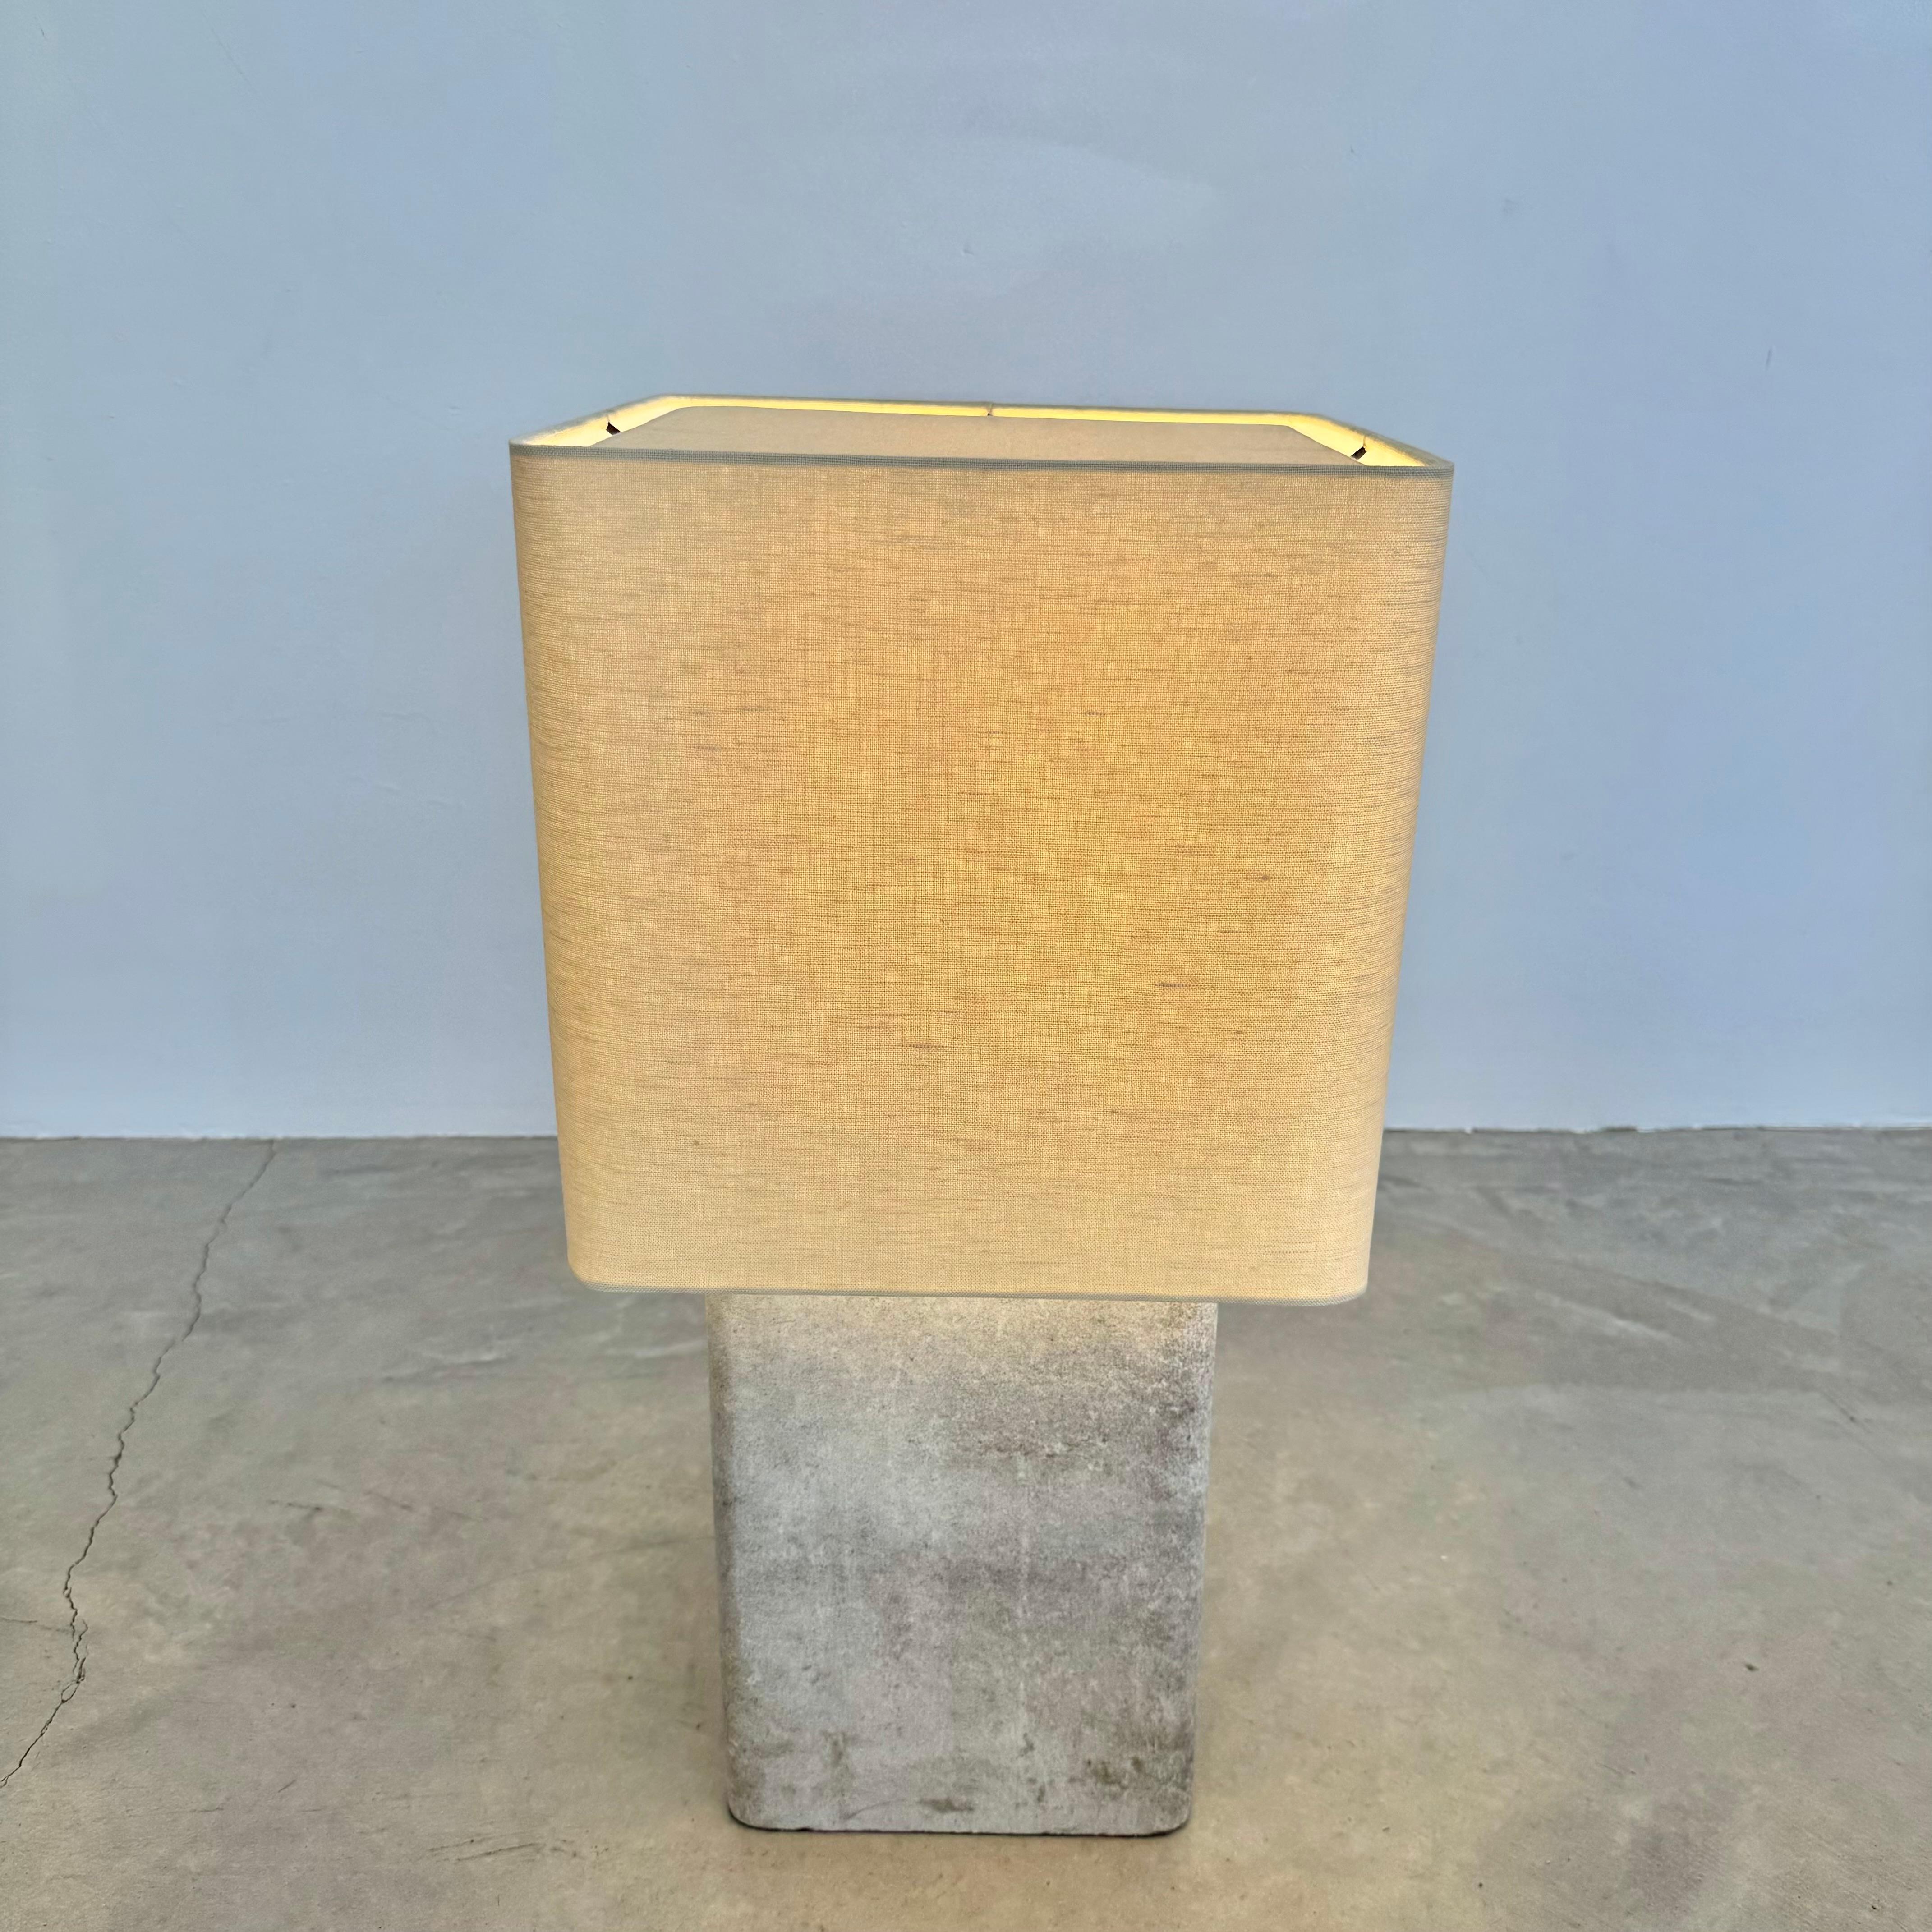 Willy Guhl Large Concrete Table Lamp, 1960s Switzerland For Sale 5